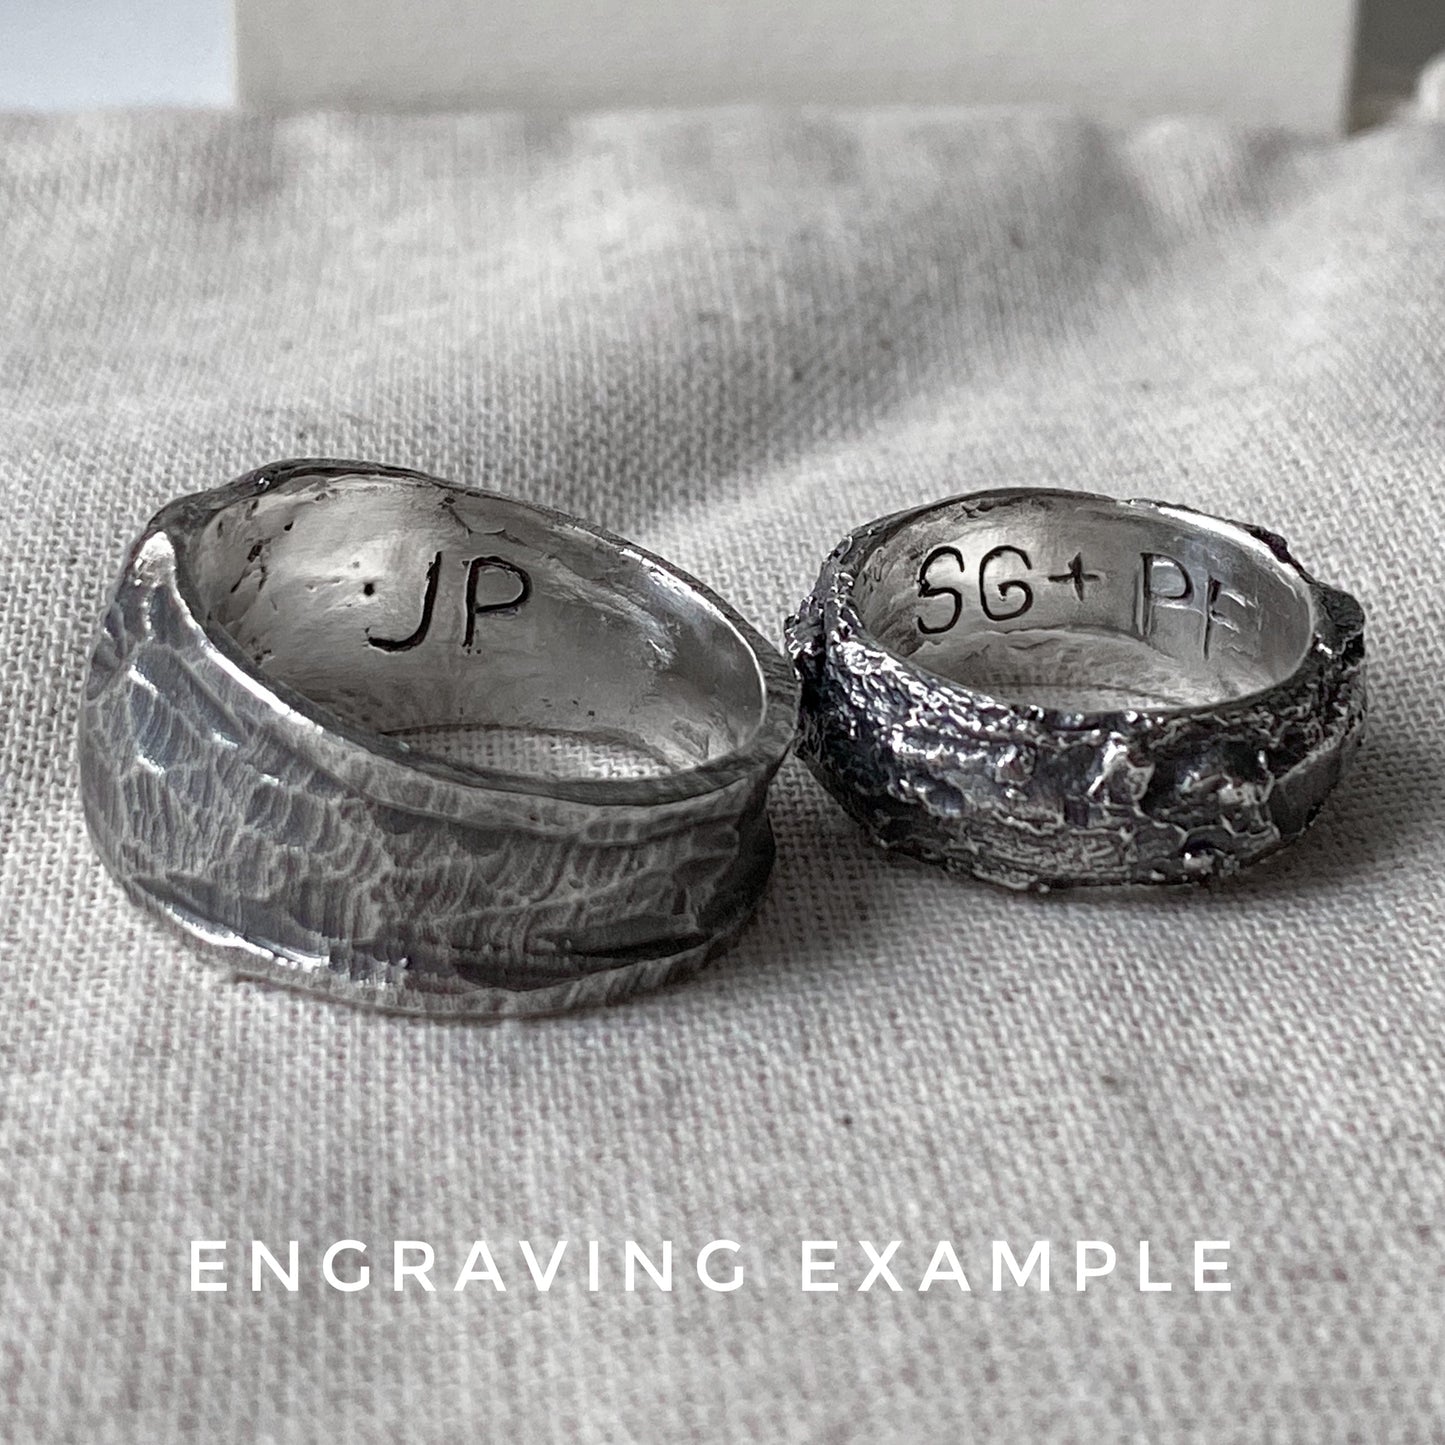 Basalt ring- light ring with a twisted back and an unusual rock texture top Lightweight rings Project50g 